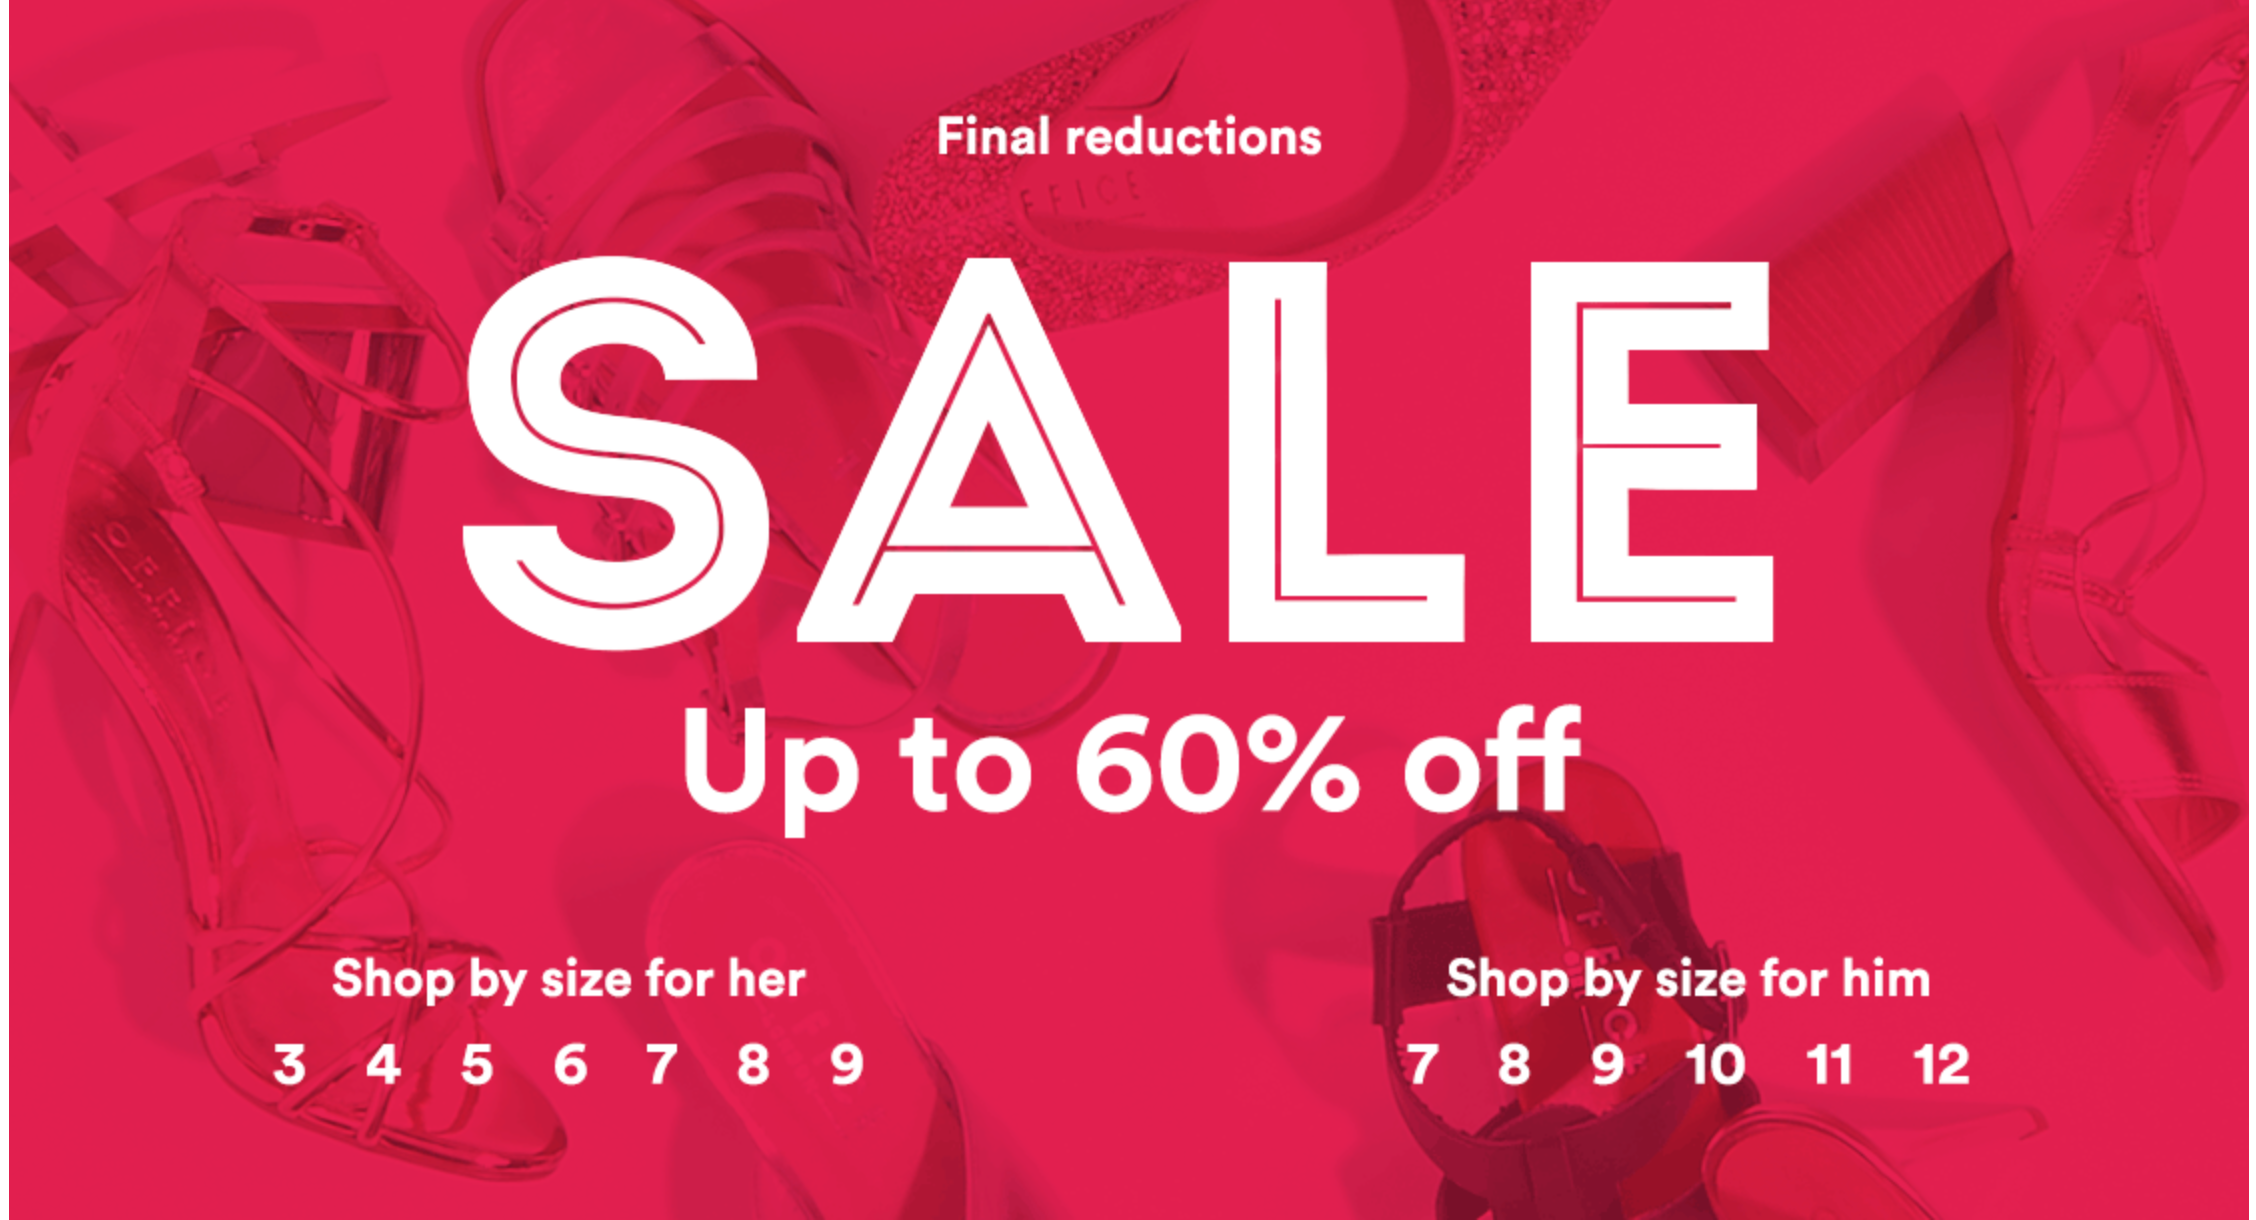 Office Shoes: sale up to 60% off